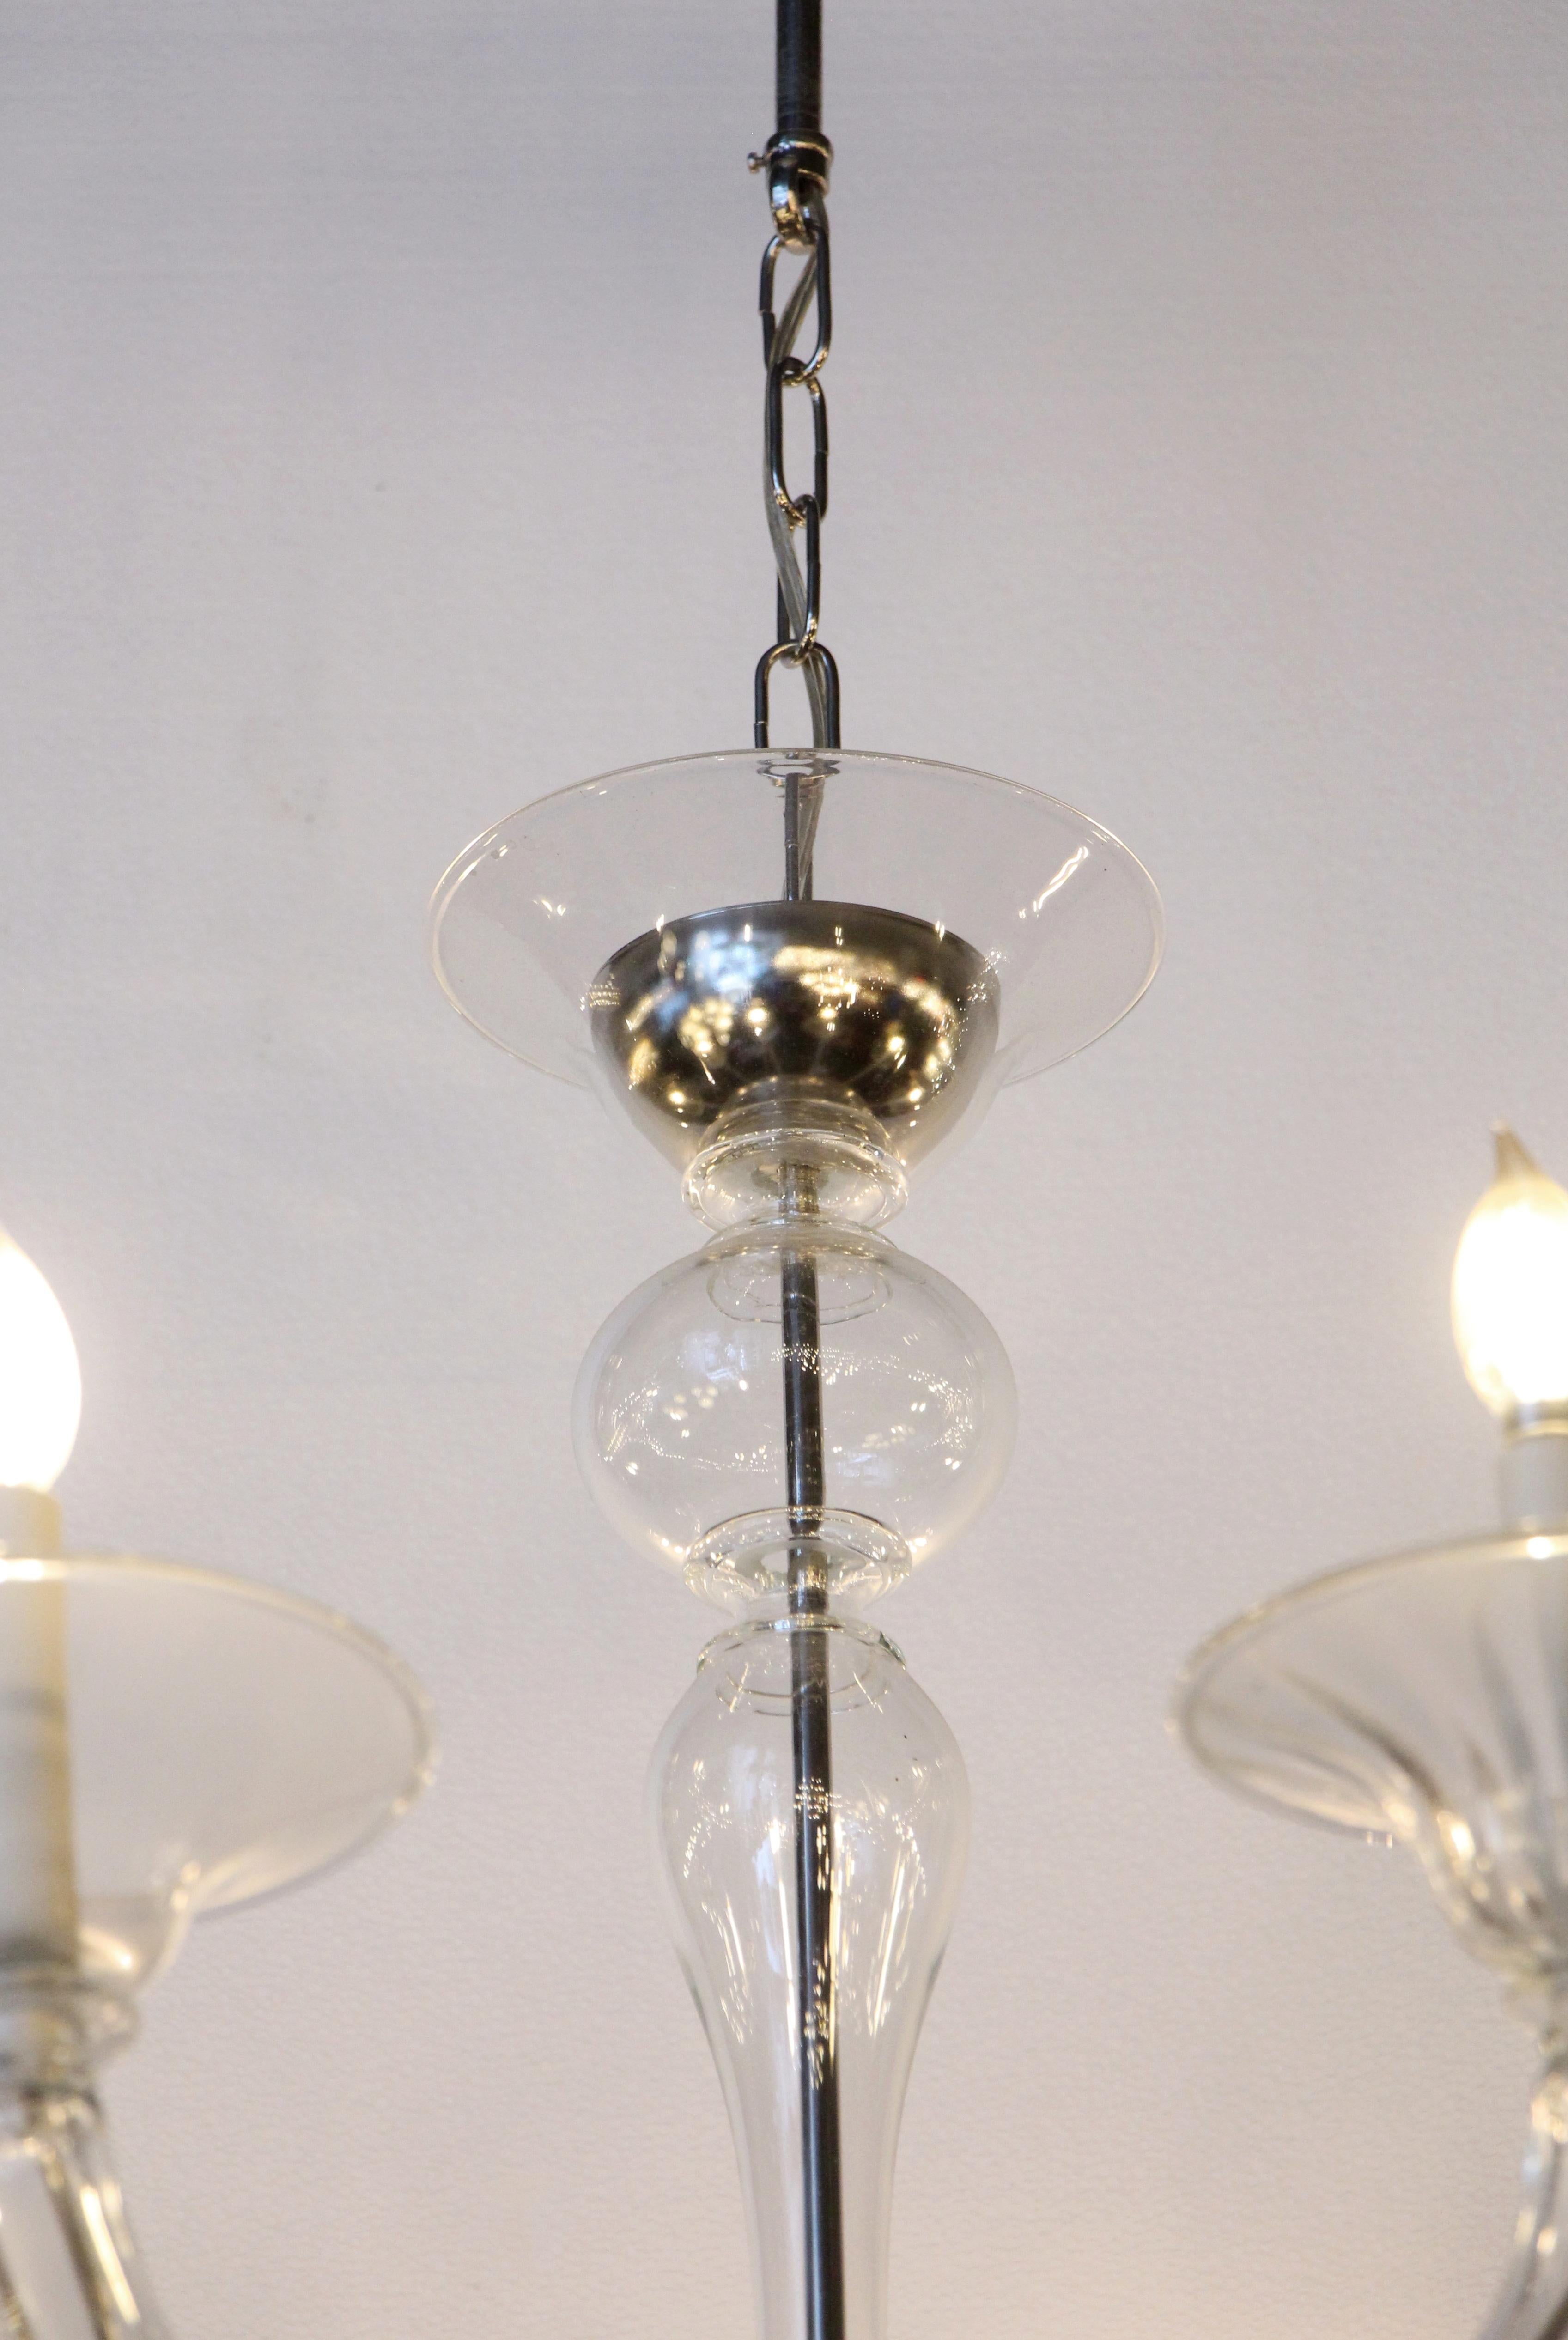 American Mid-Century Modern 8-Arm Glass and Brushed Steel Chandelier